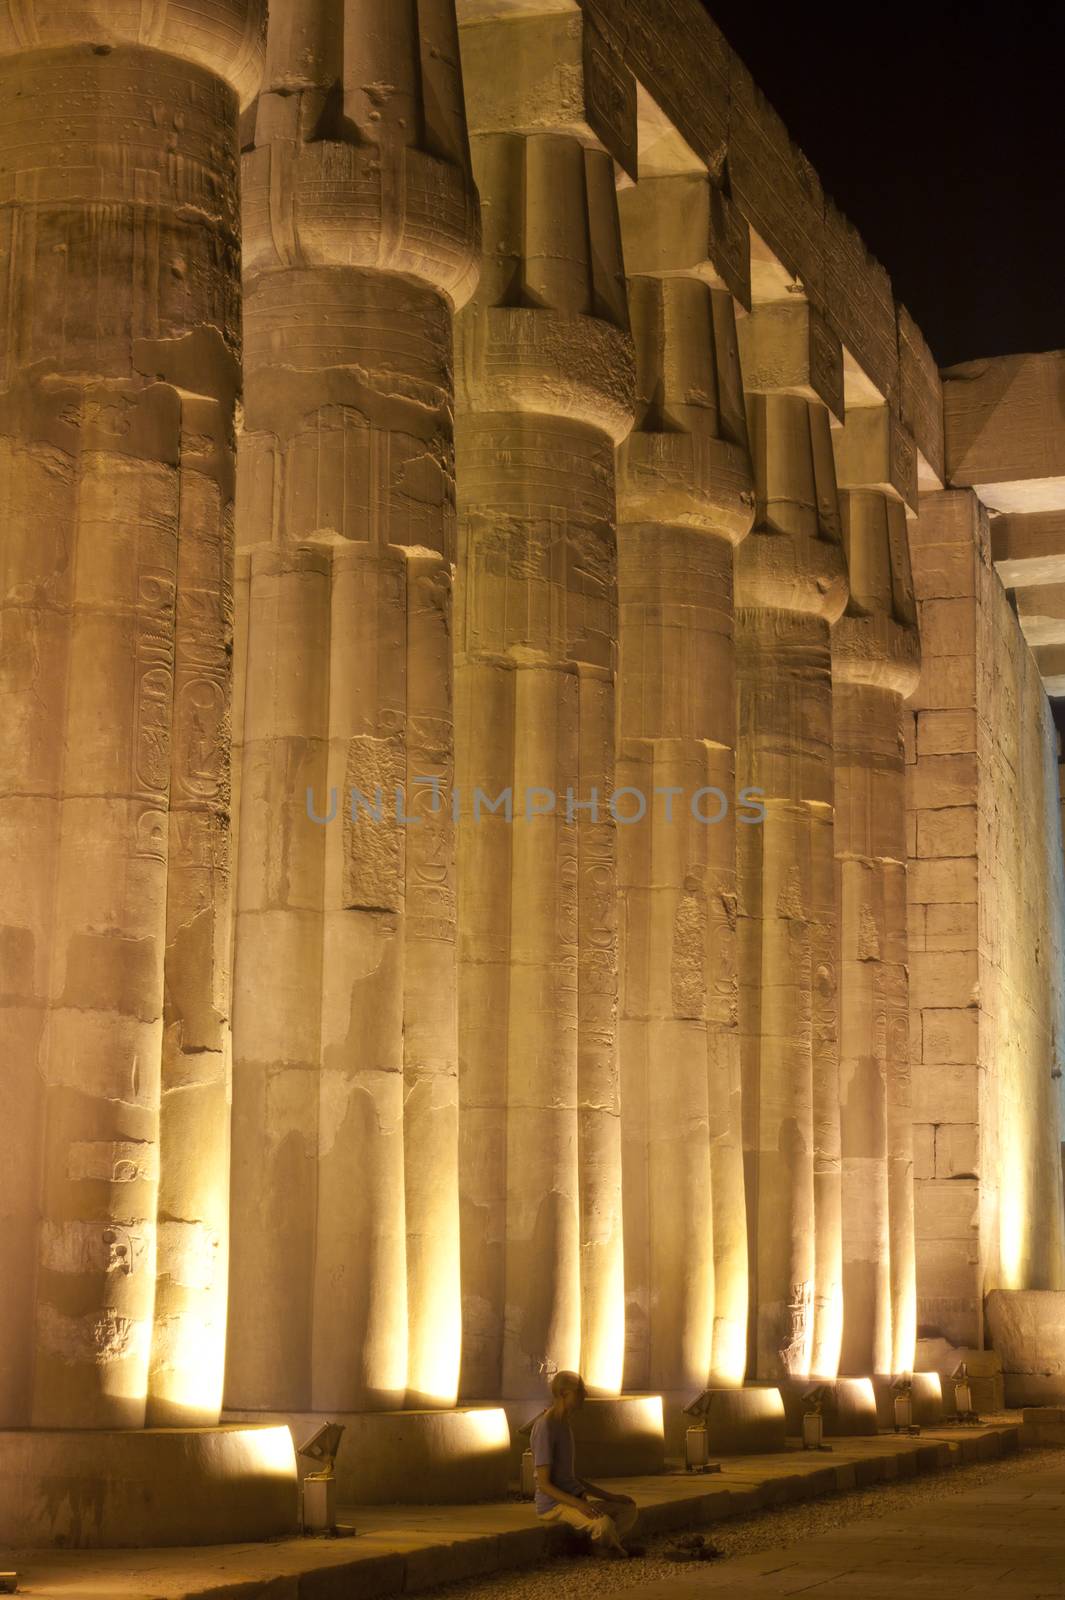 Columns at Luxor Temple in the night with lighting